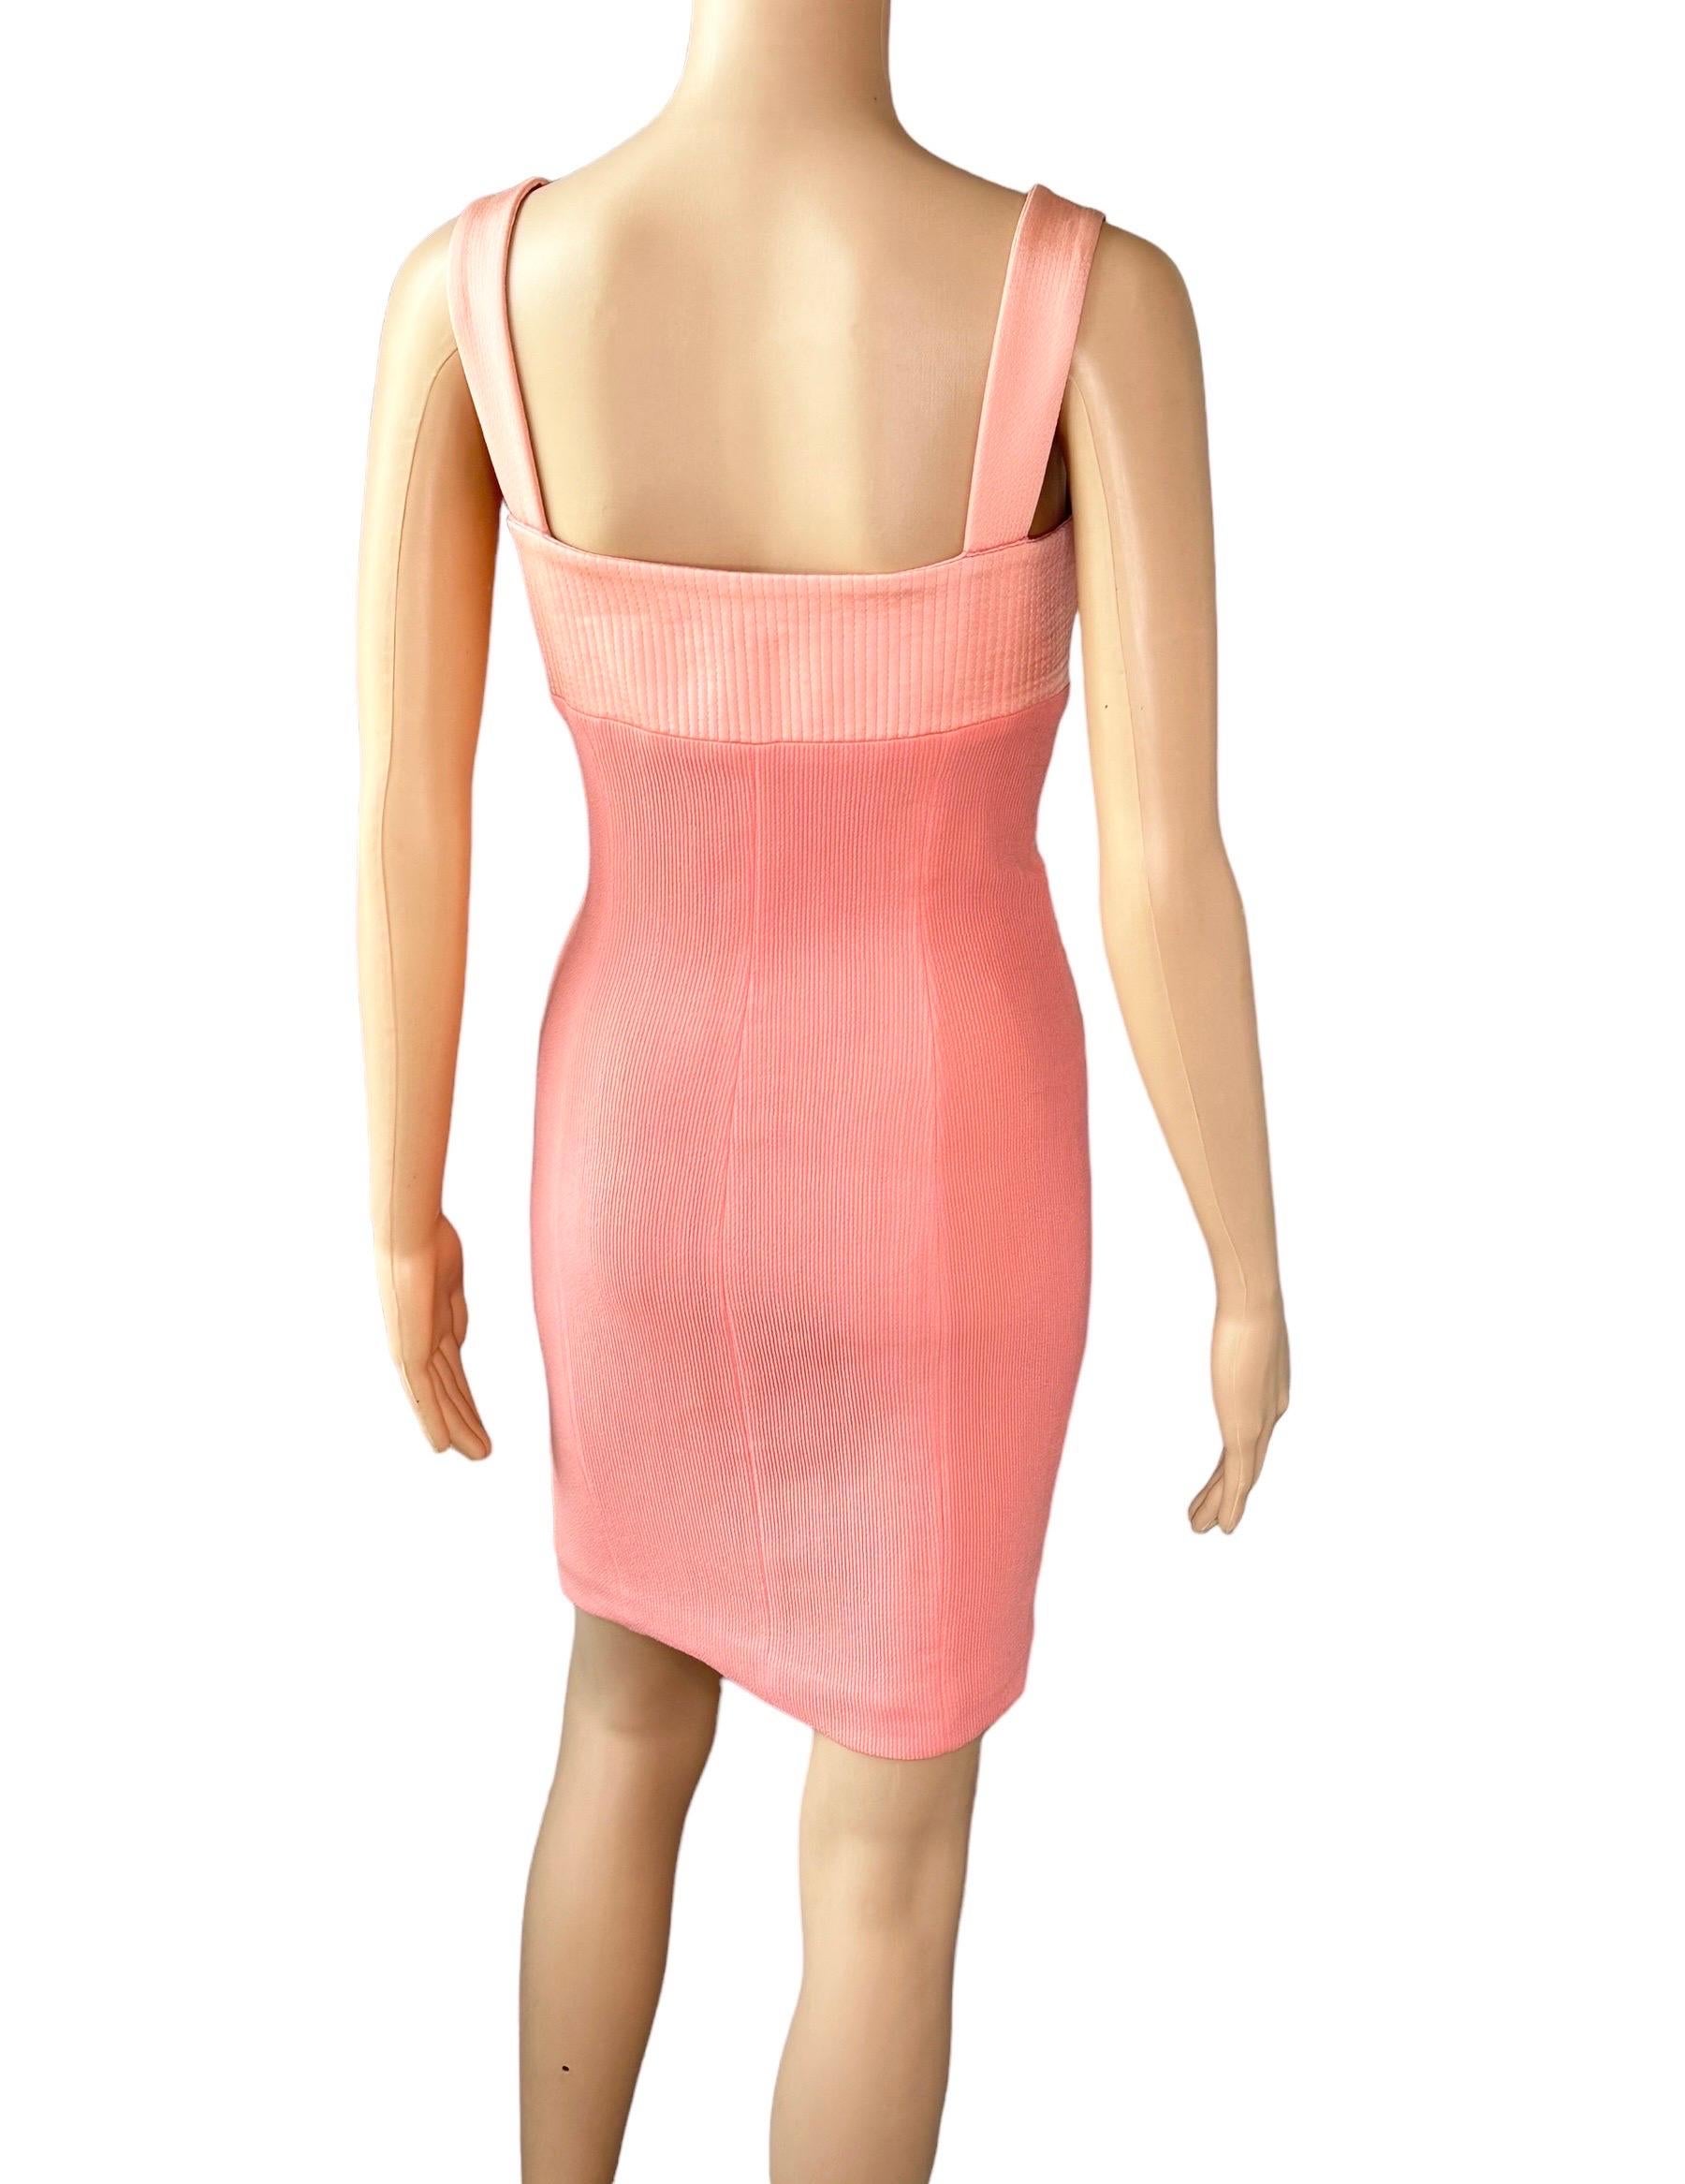 Gianni Versace S/S 1992 Couture Bustier Corset Lace Up Mini Dress In Good Condition In Naples, FL